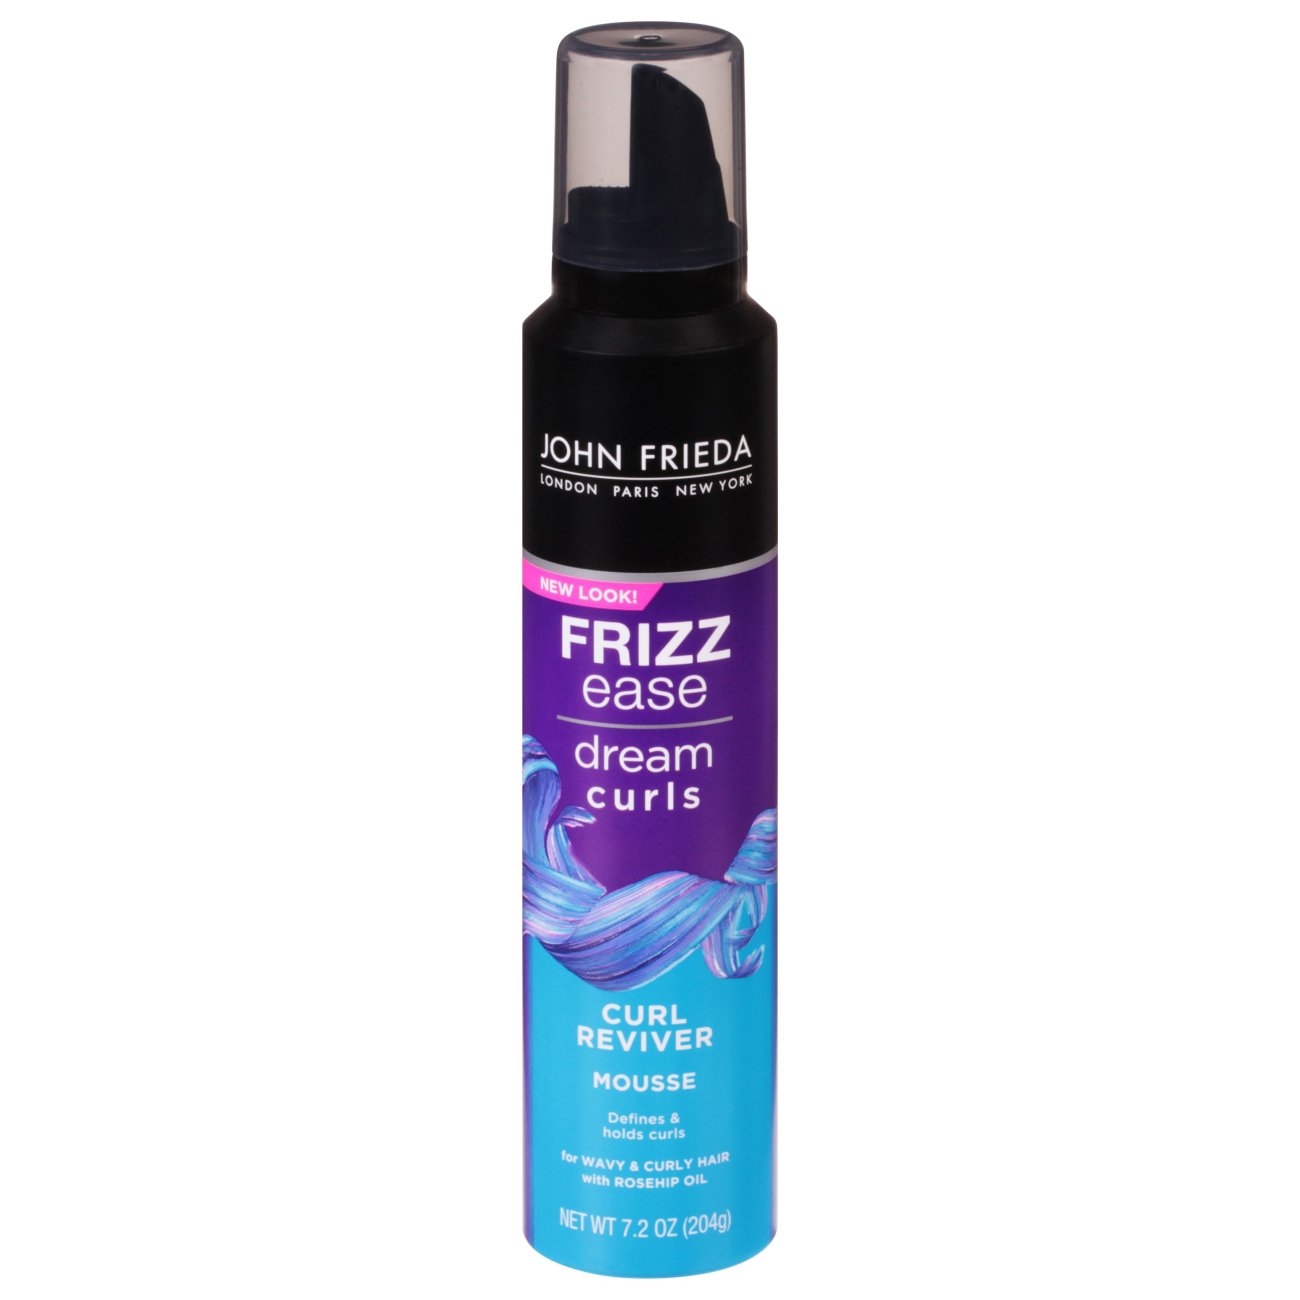 John Frieda Frizz Ease Dream Curls with Heat Protection Curl Reviver Mousse